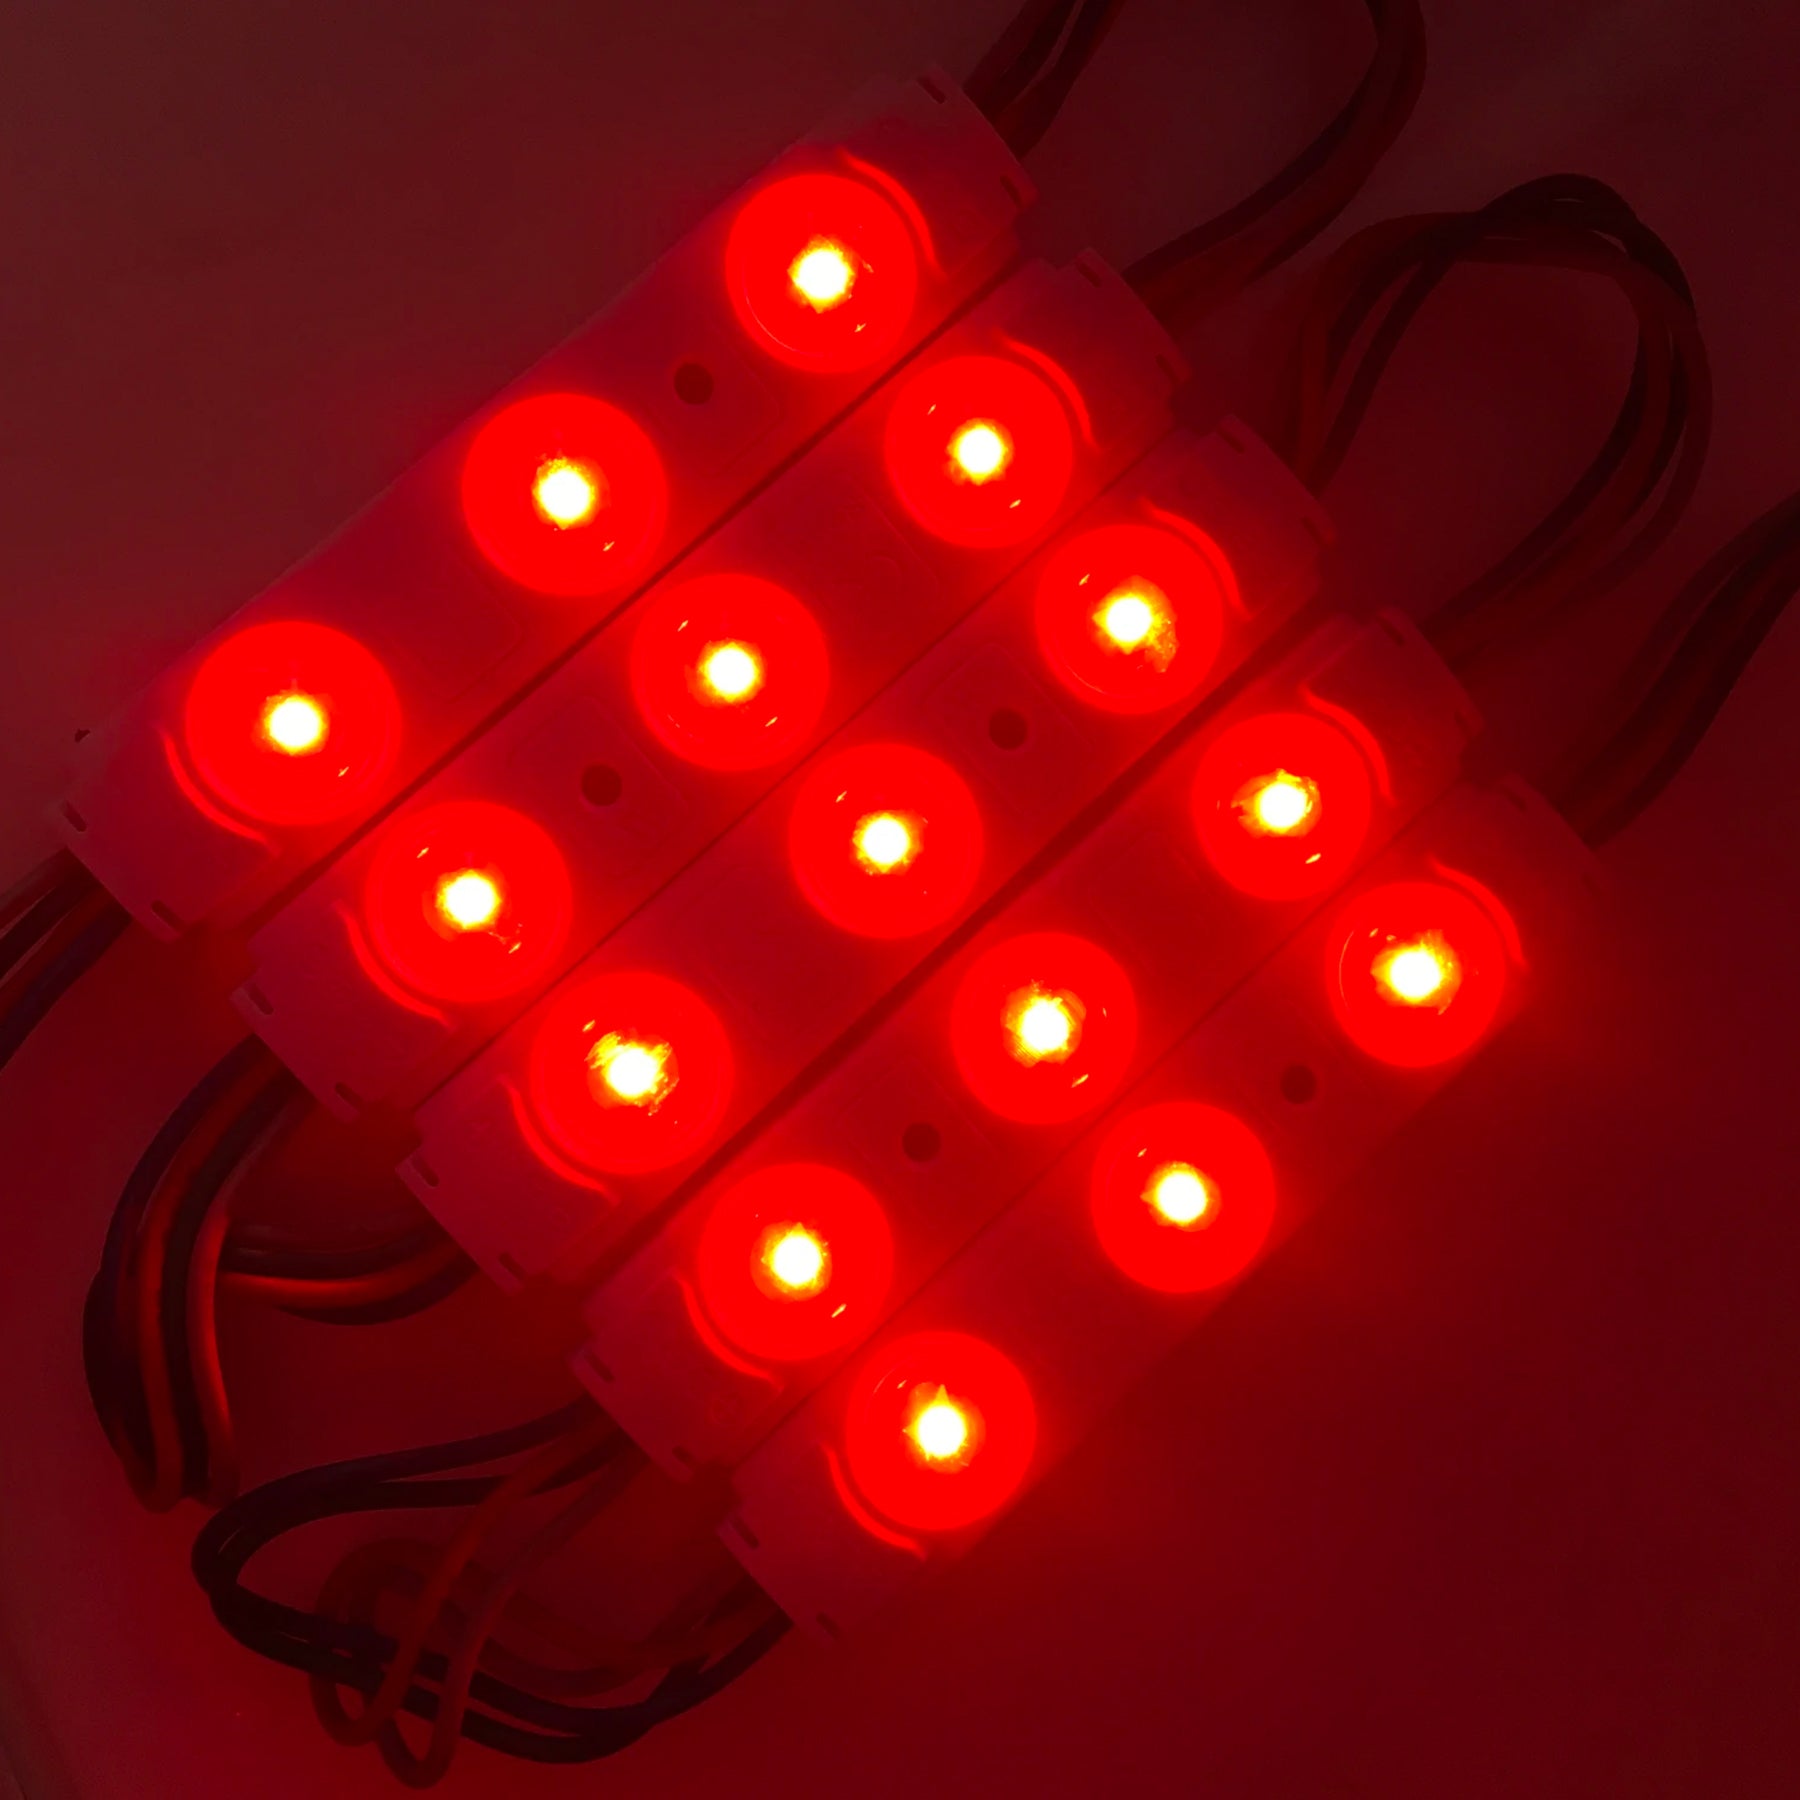 RGB LED Module Lights, 3LEDs/Mod, DC12V, 0.65W, Waterproof Decorative Light for Letter Sign Advertising Signs with Tape Adhesive Backside (40-Pack)